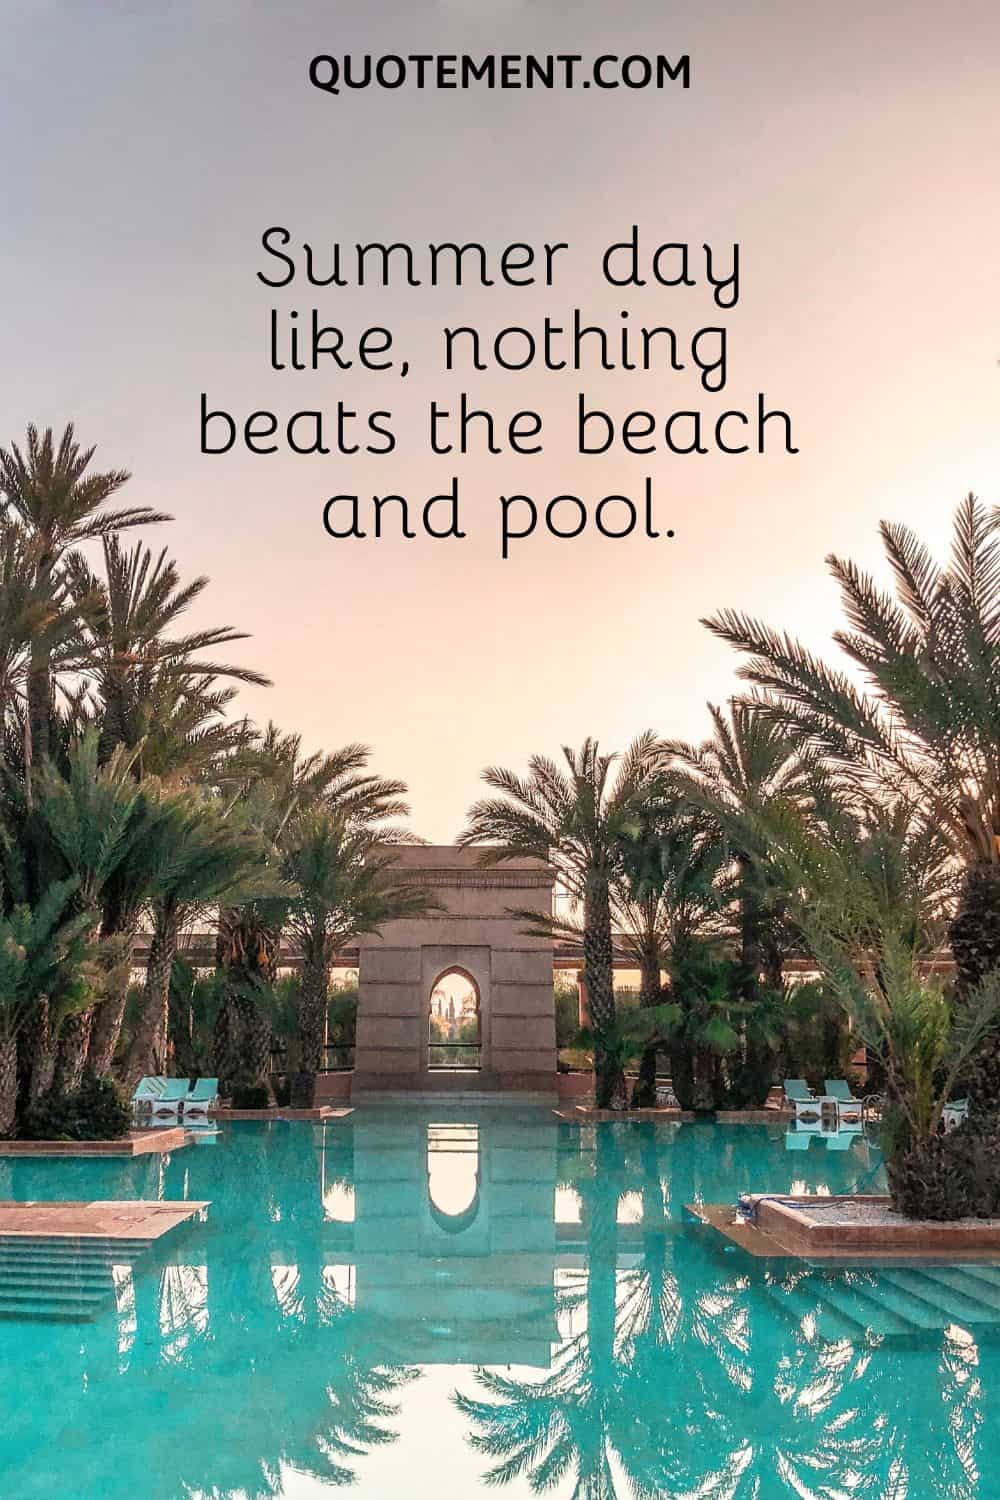 Summer day like, nothing beats the beach and pool.